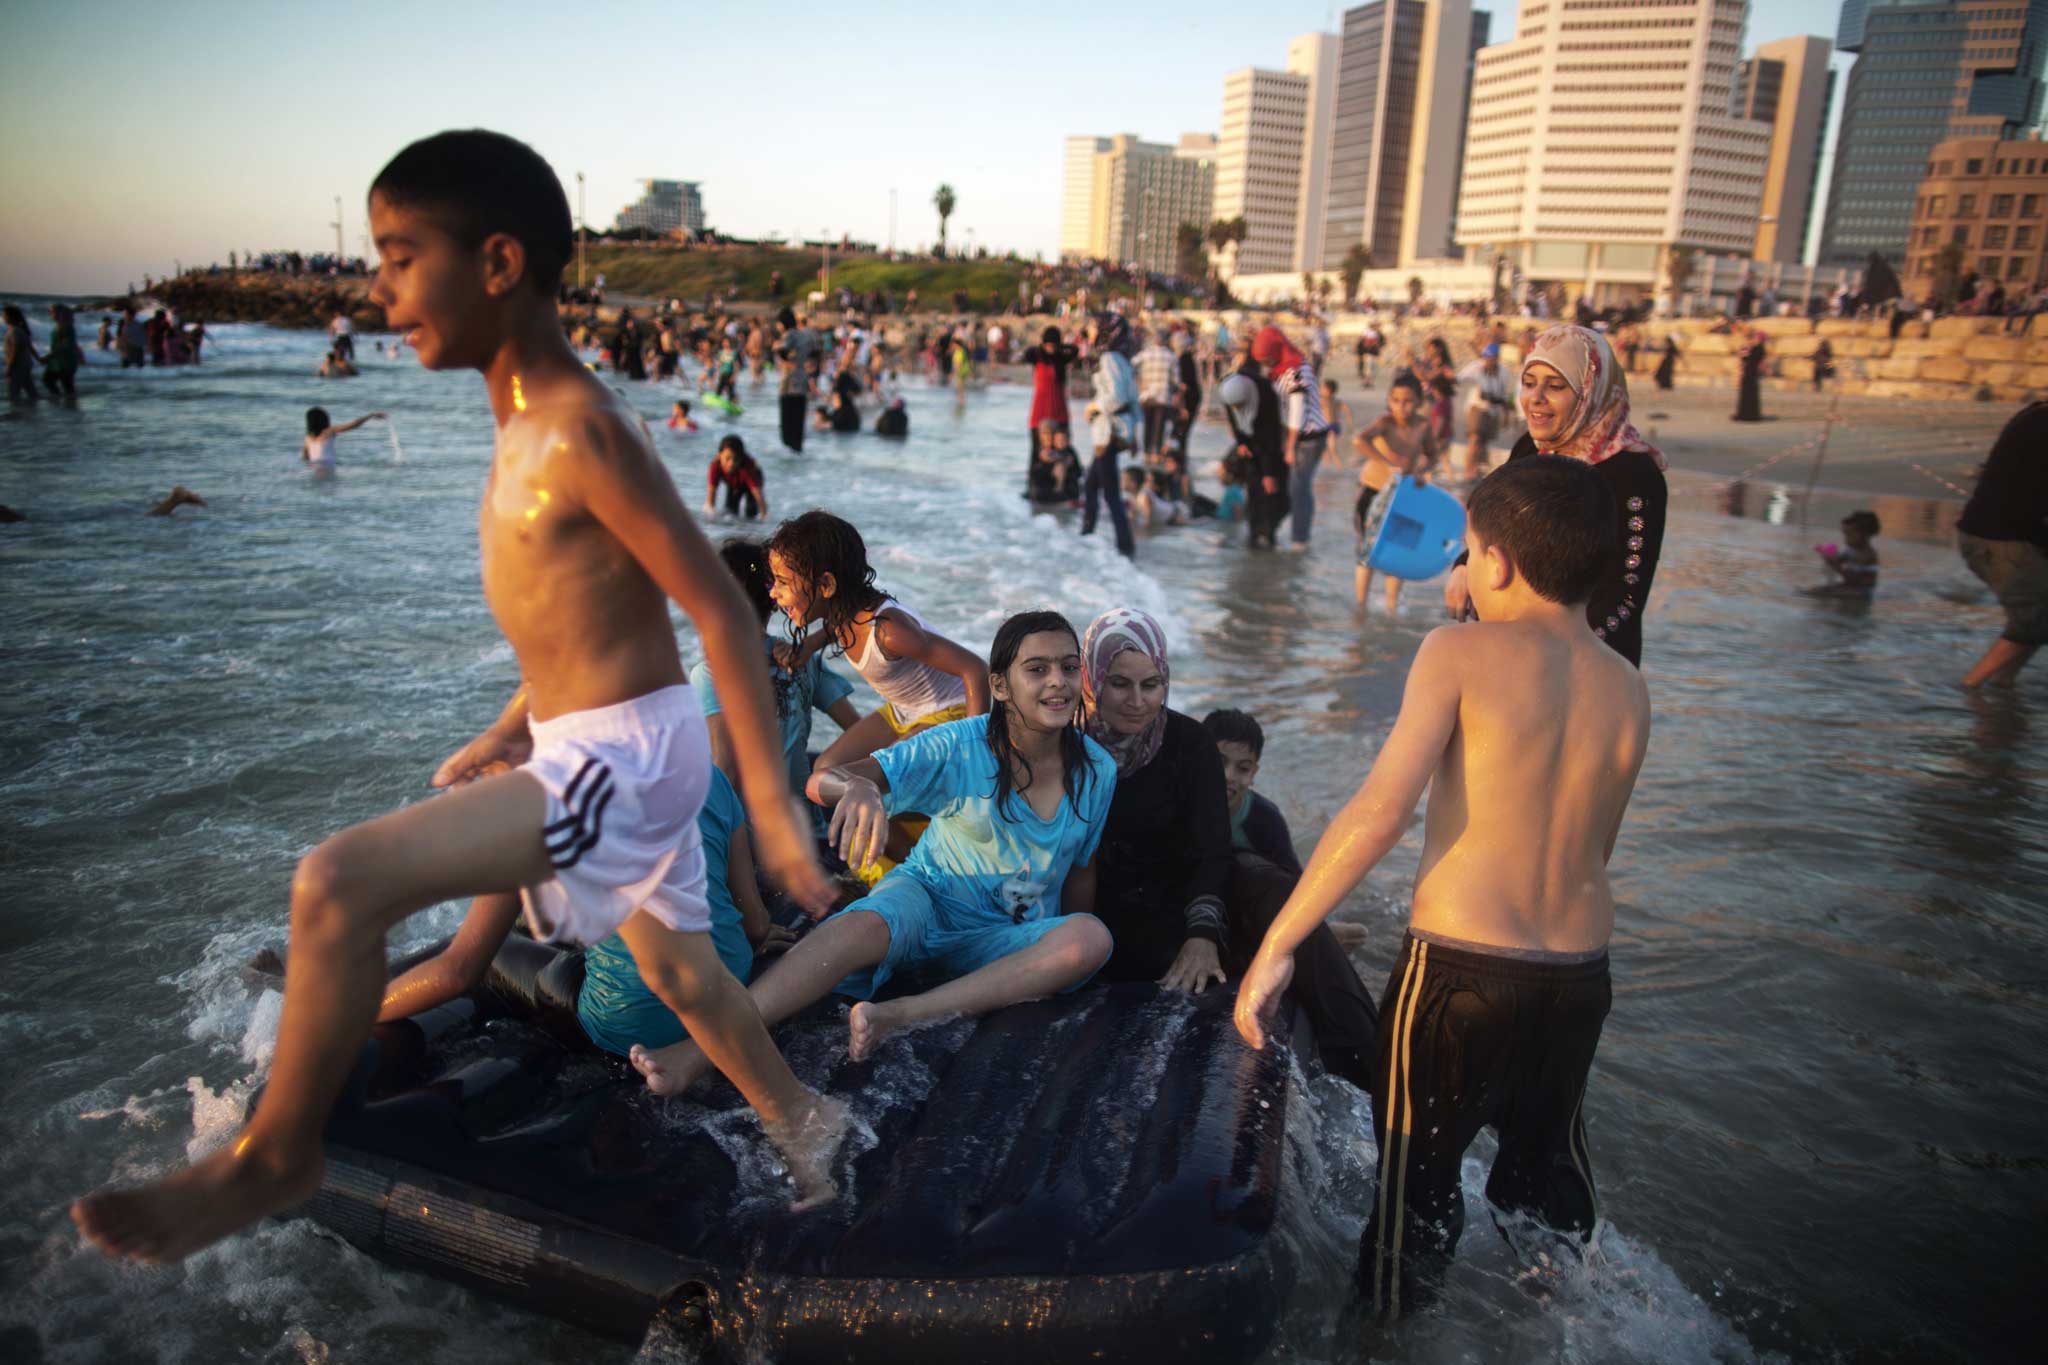 A state founded on hubris? Palestinians from the West Bank at Tel Aviv beach